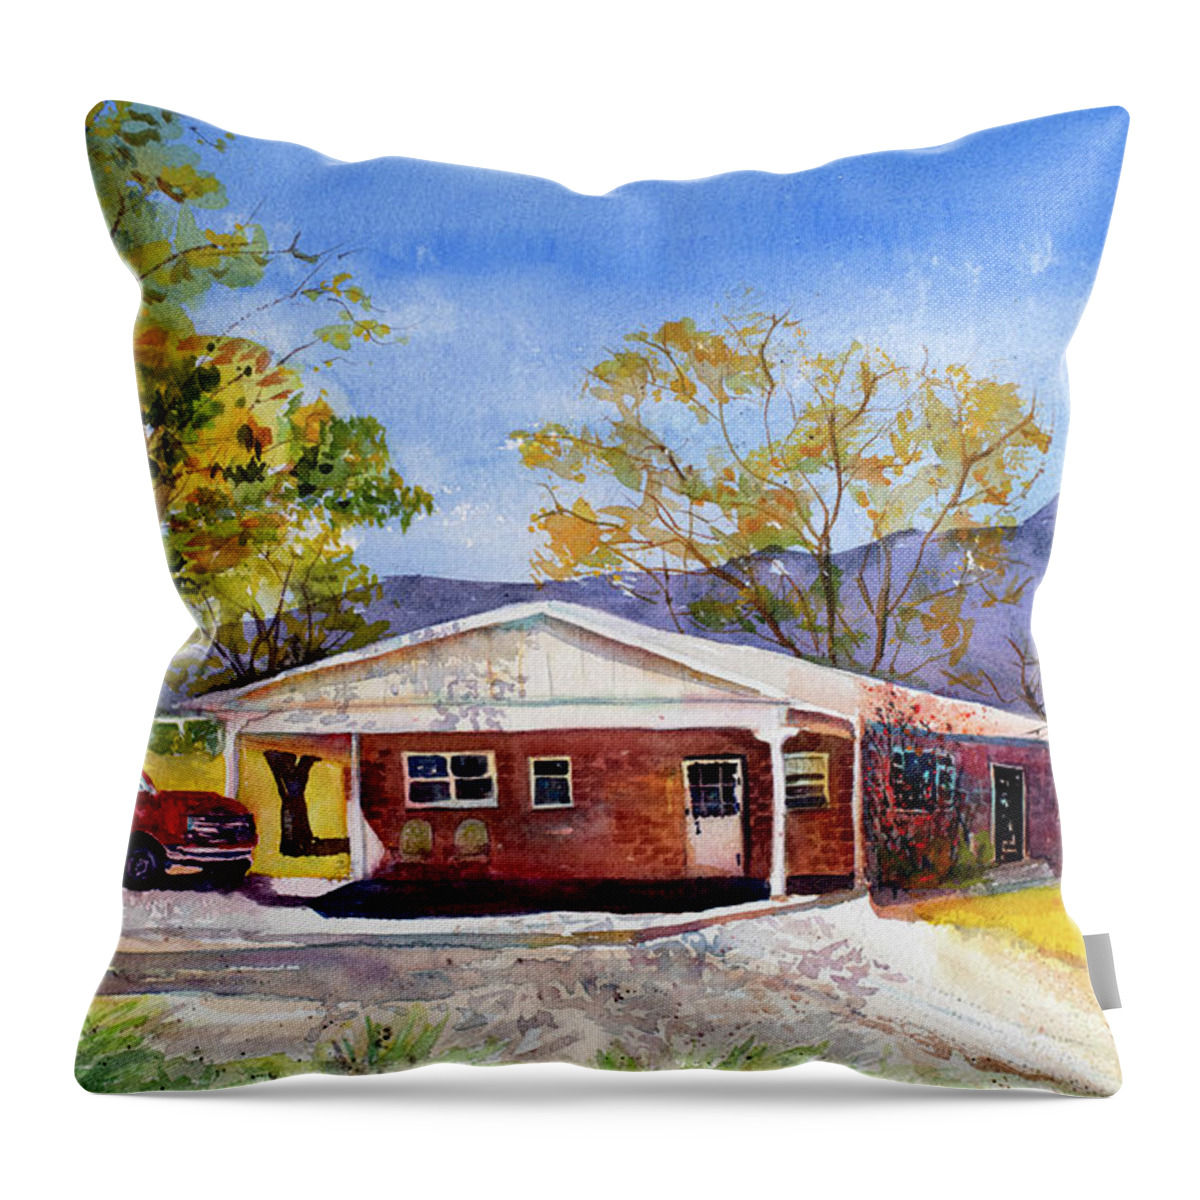 House Throw Pillow featuring the painting New Mexico House by Cheryl Prather